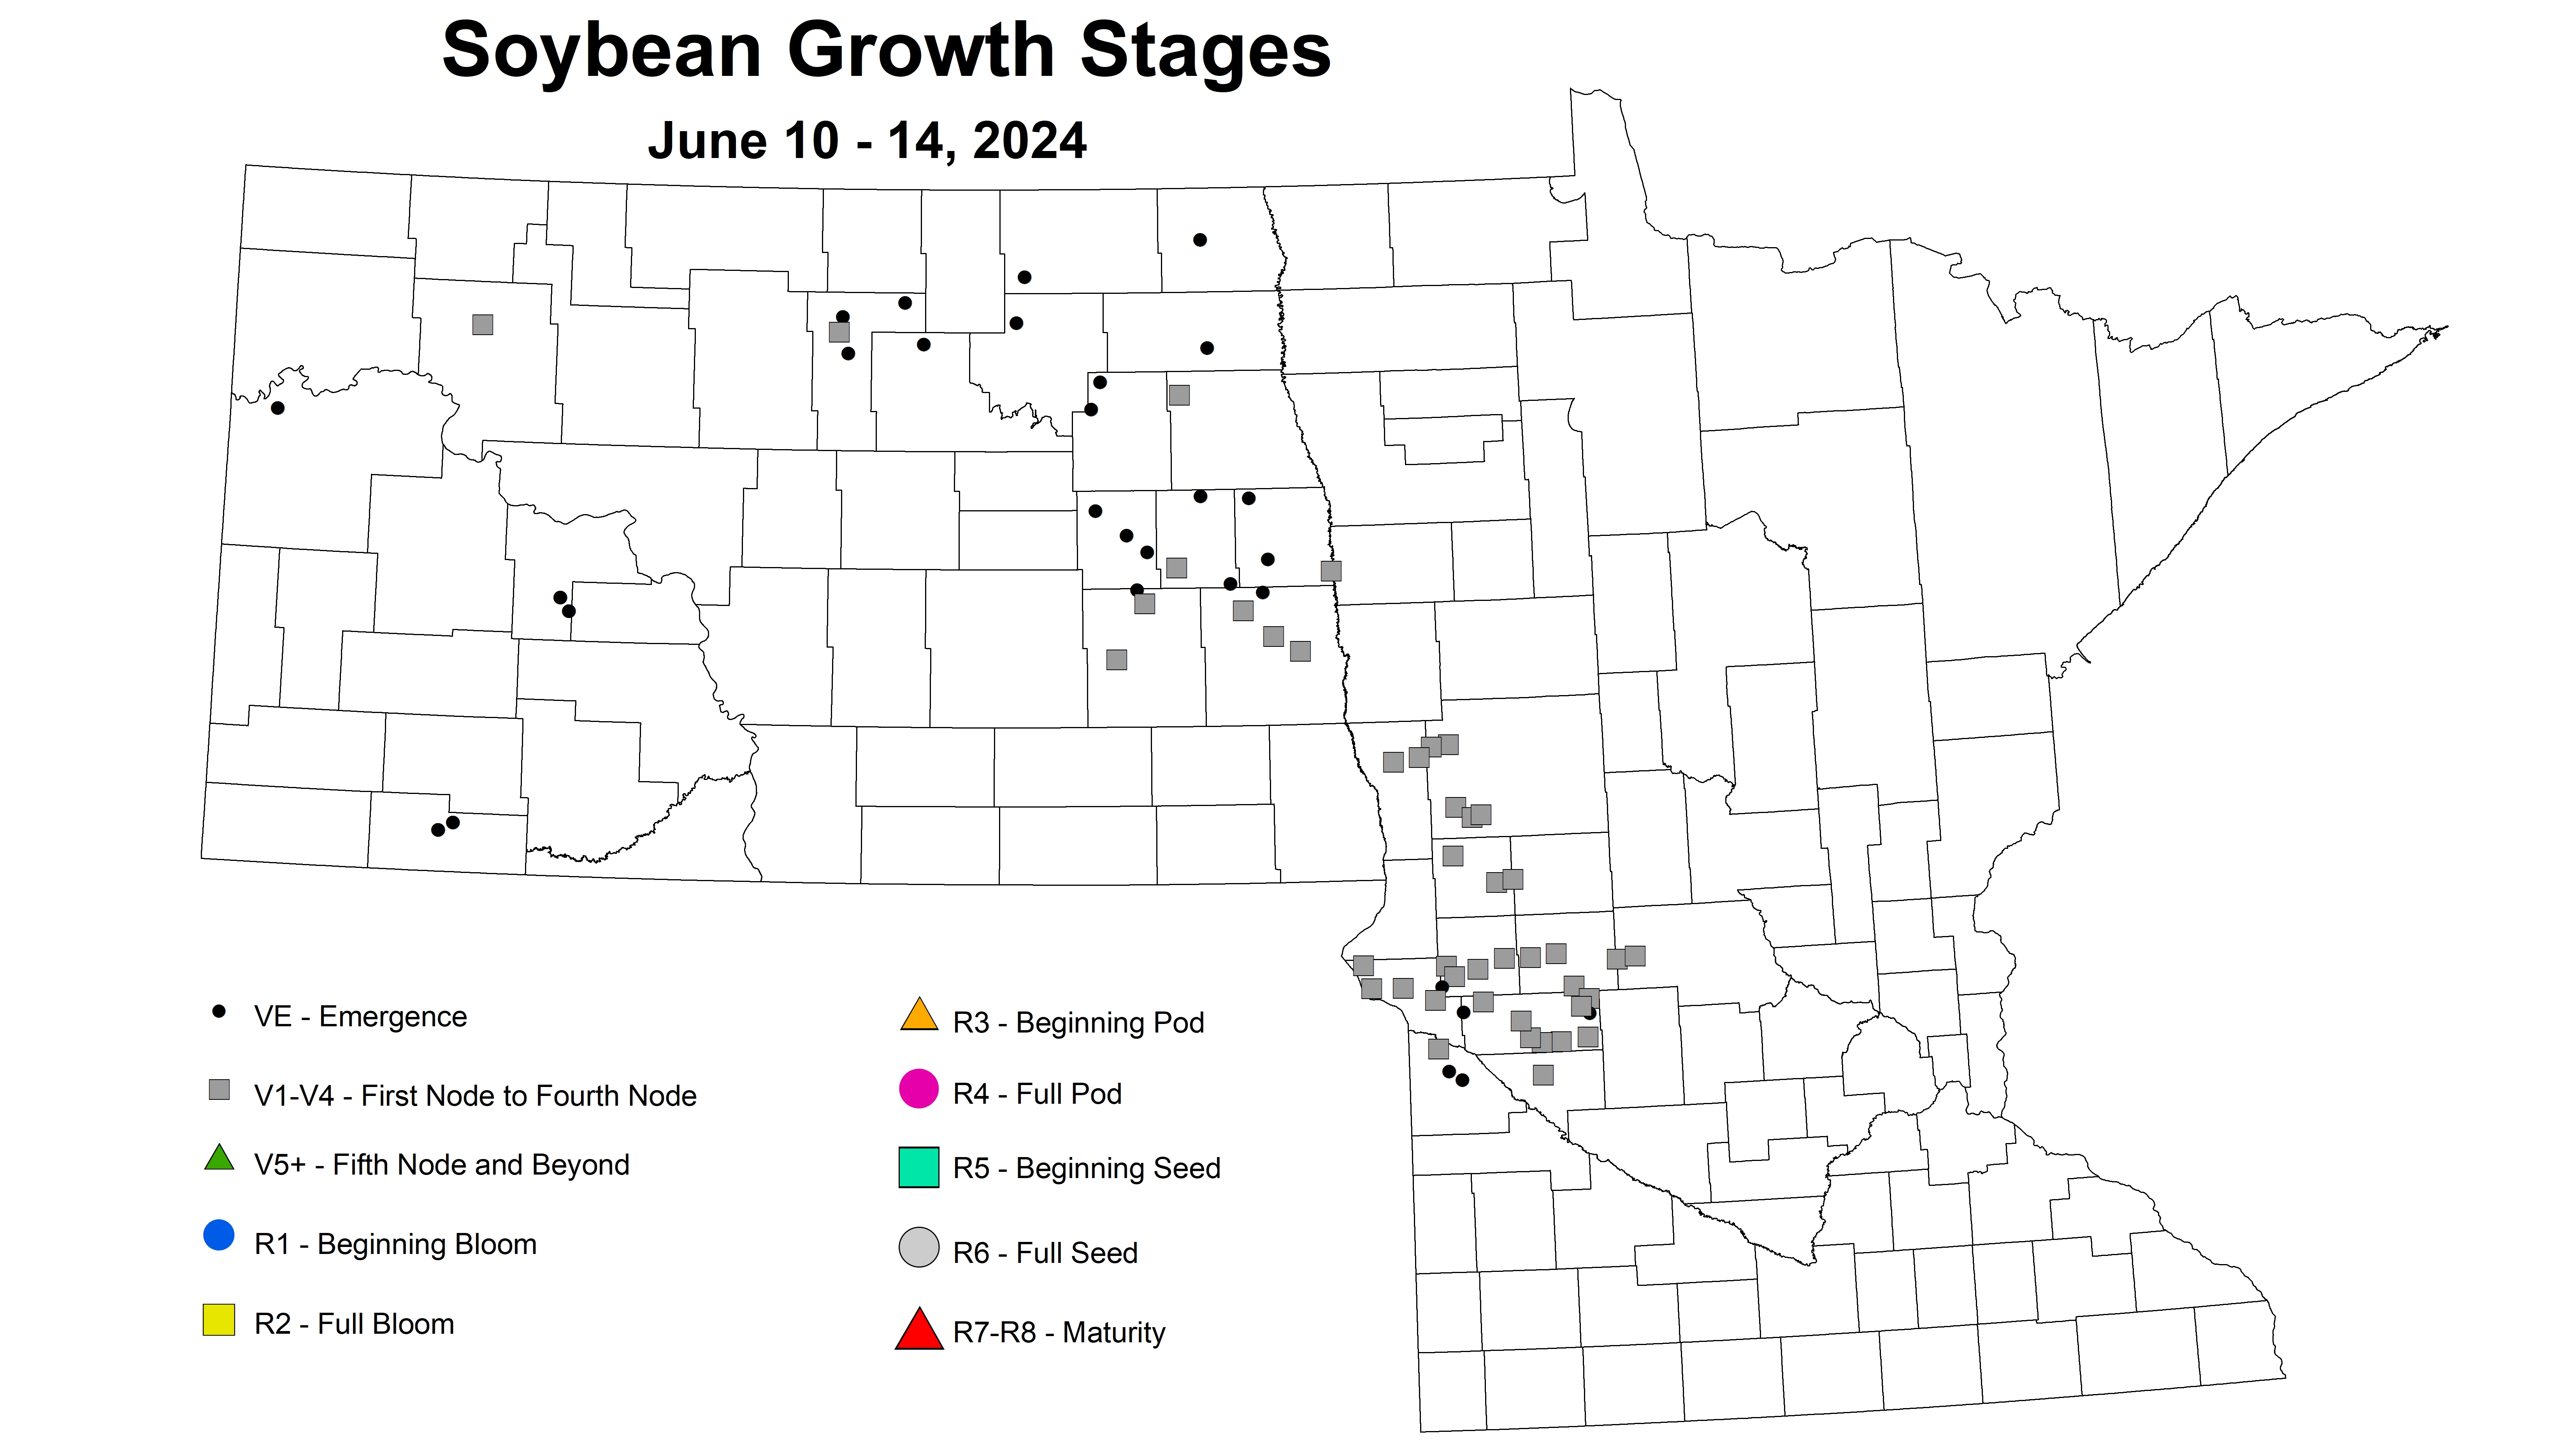 soybean growth stages June 10-14 2024